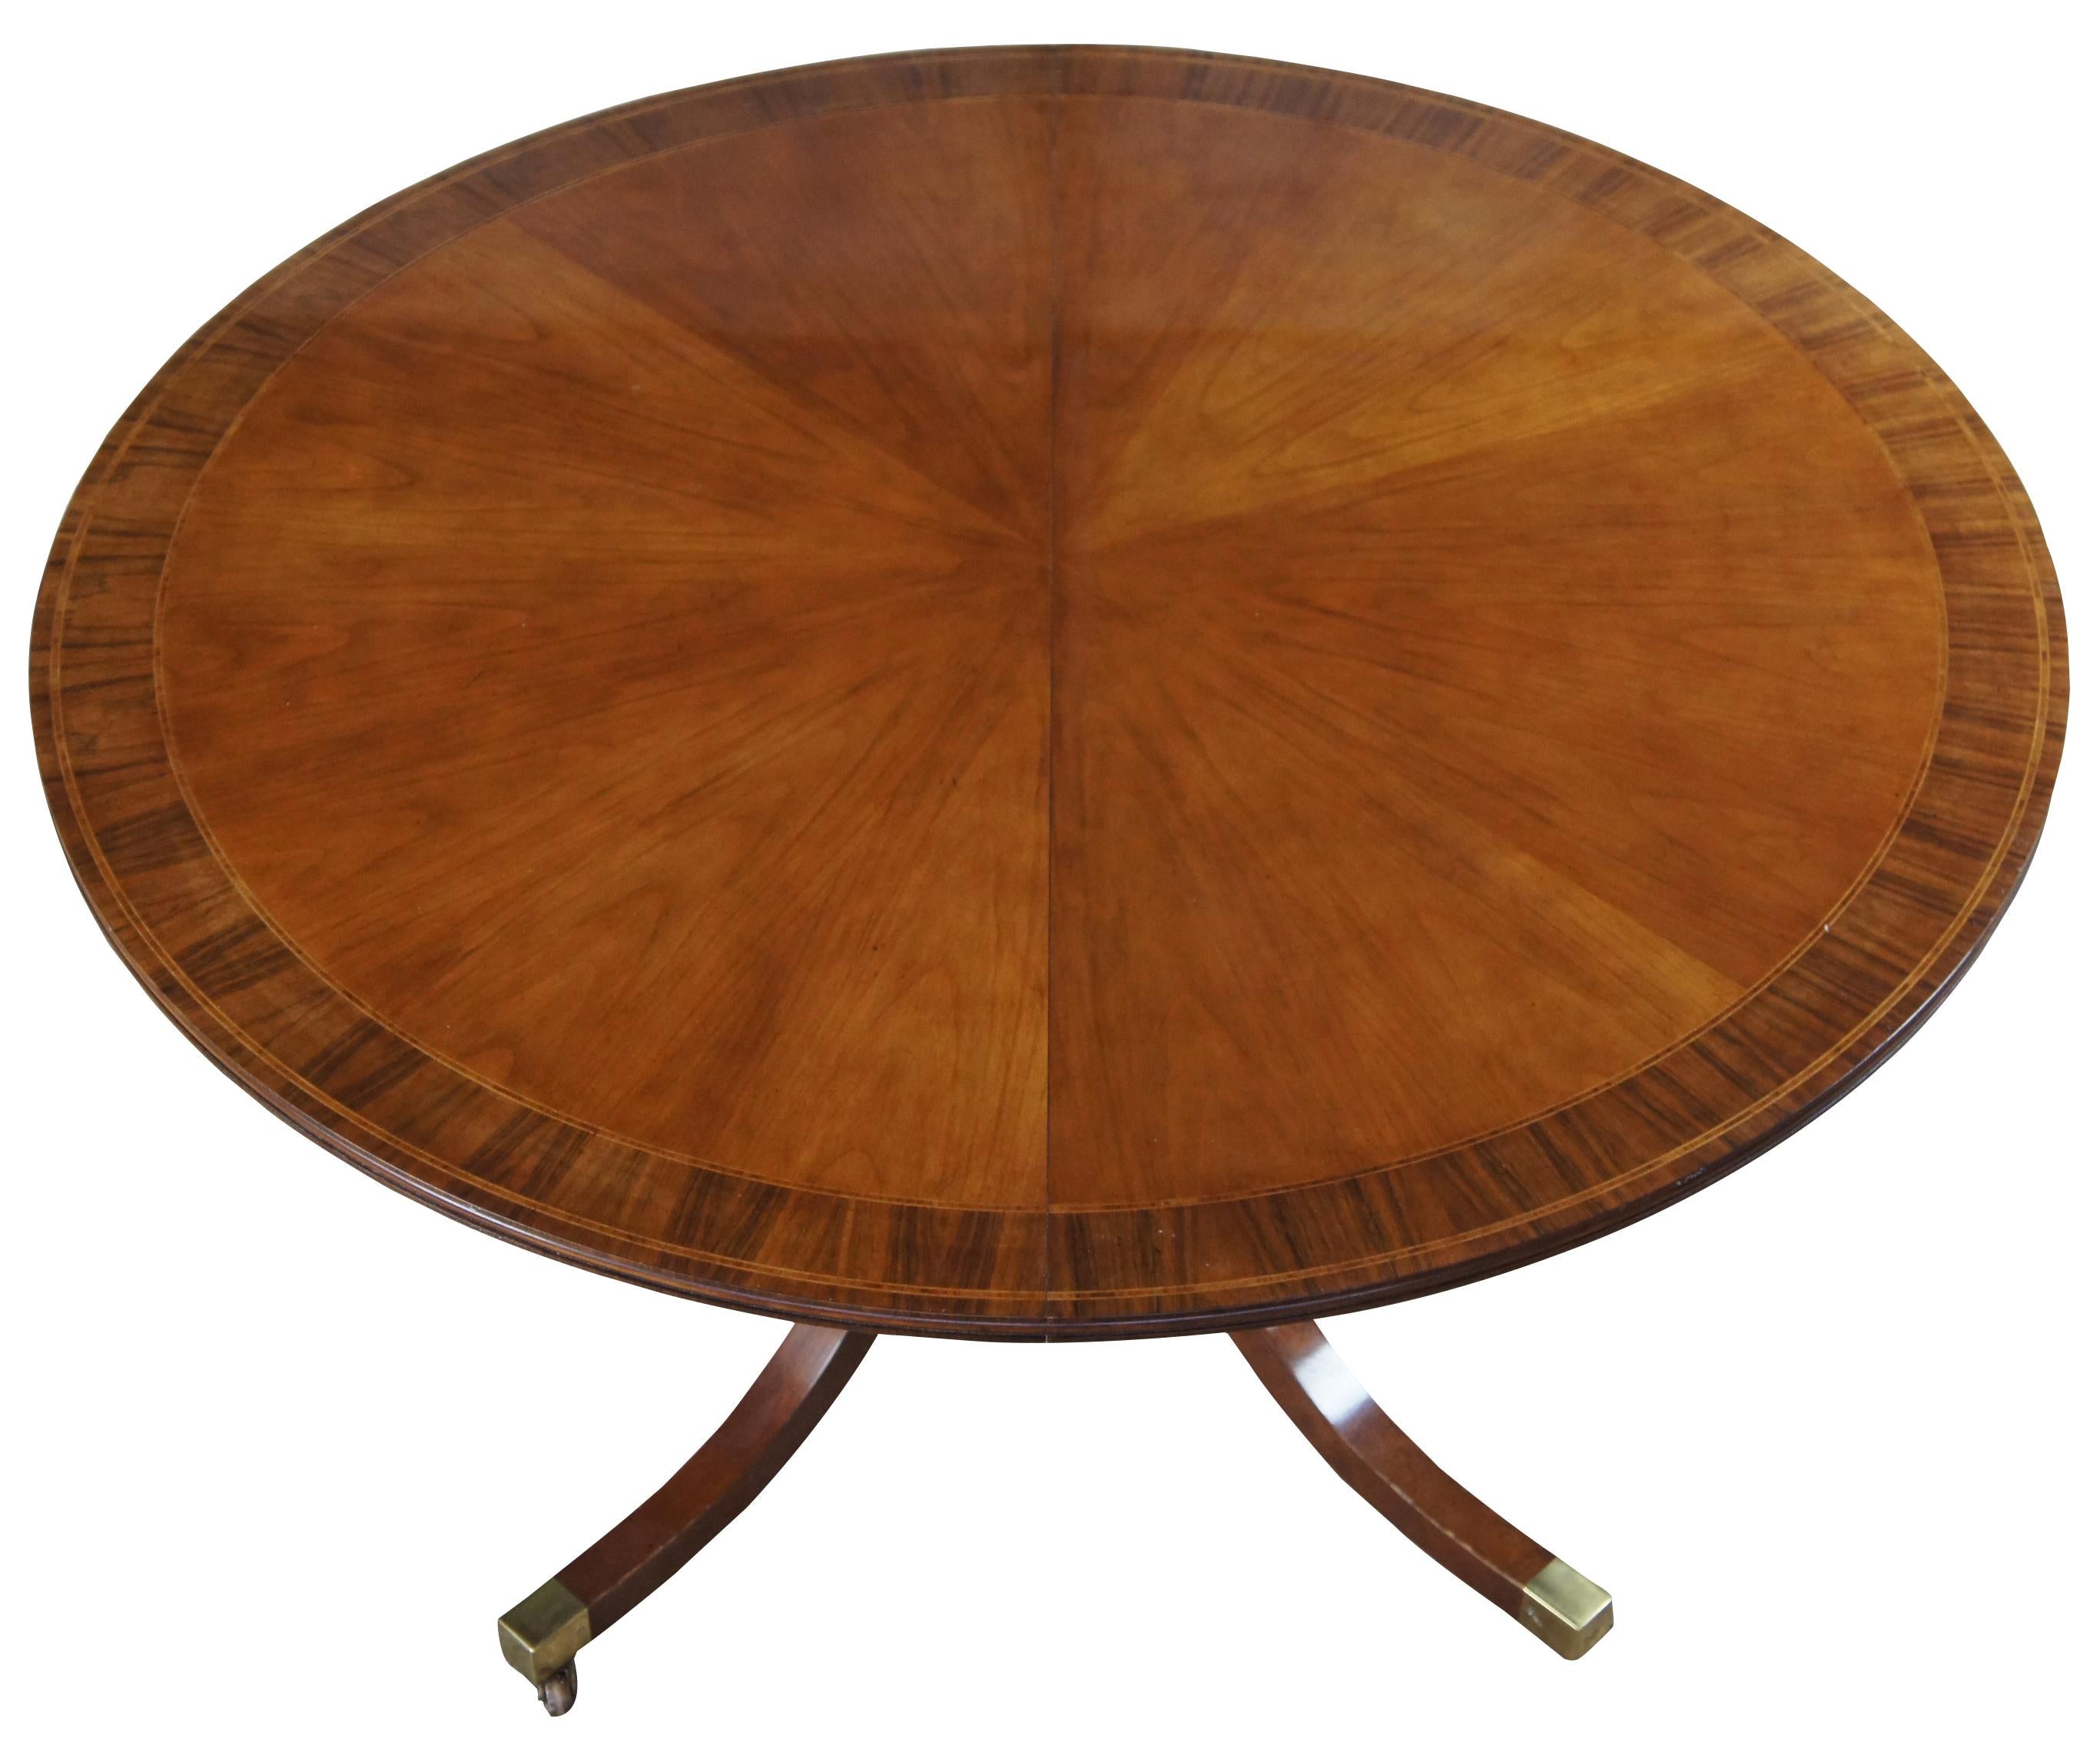 Georgian inspired dining table from the McMillian collection by Baker Furniture. The late 1980s marked the debut of The McMillen Collection, continental furniture drawn from the archives of the McMillian Design firm in New York. This gorgeous